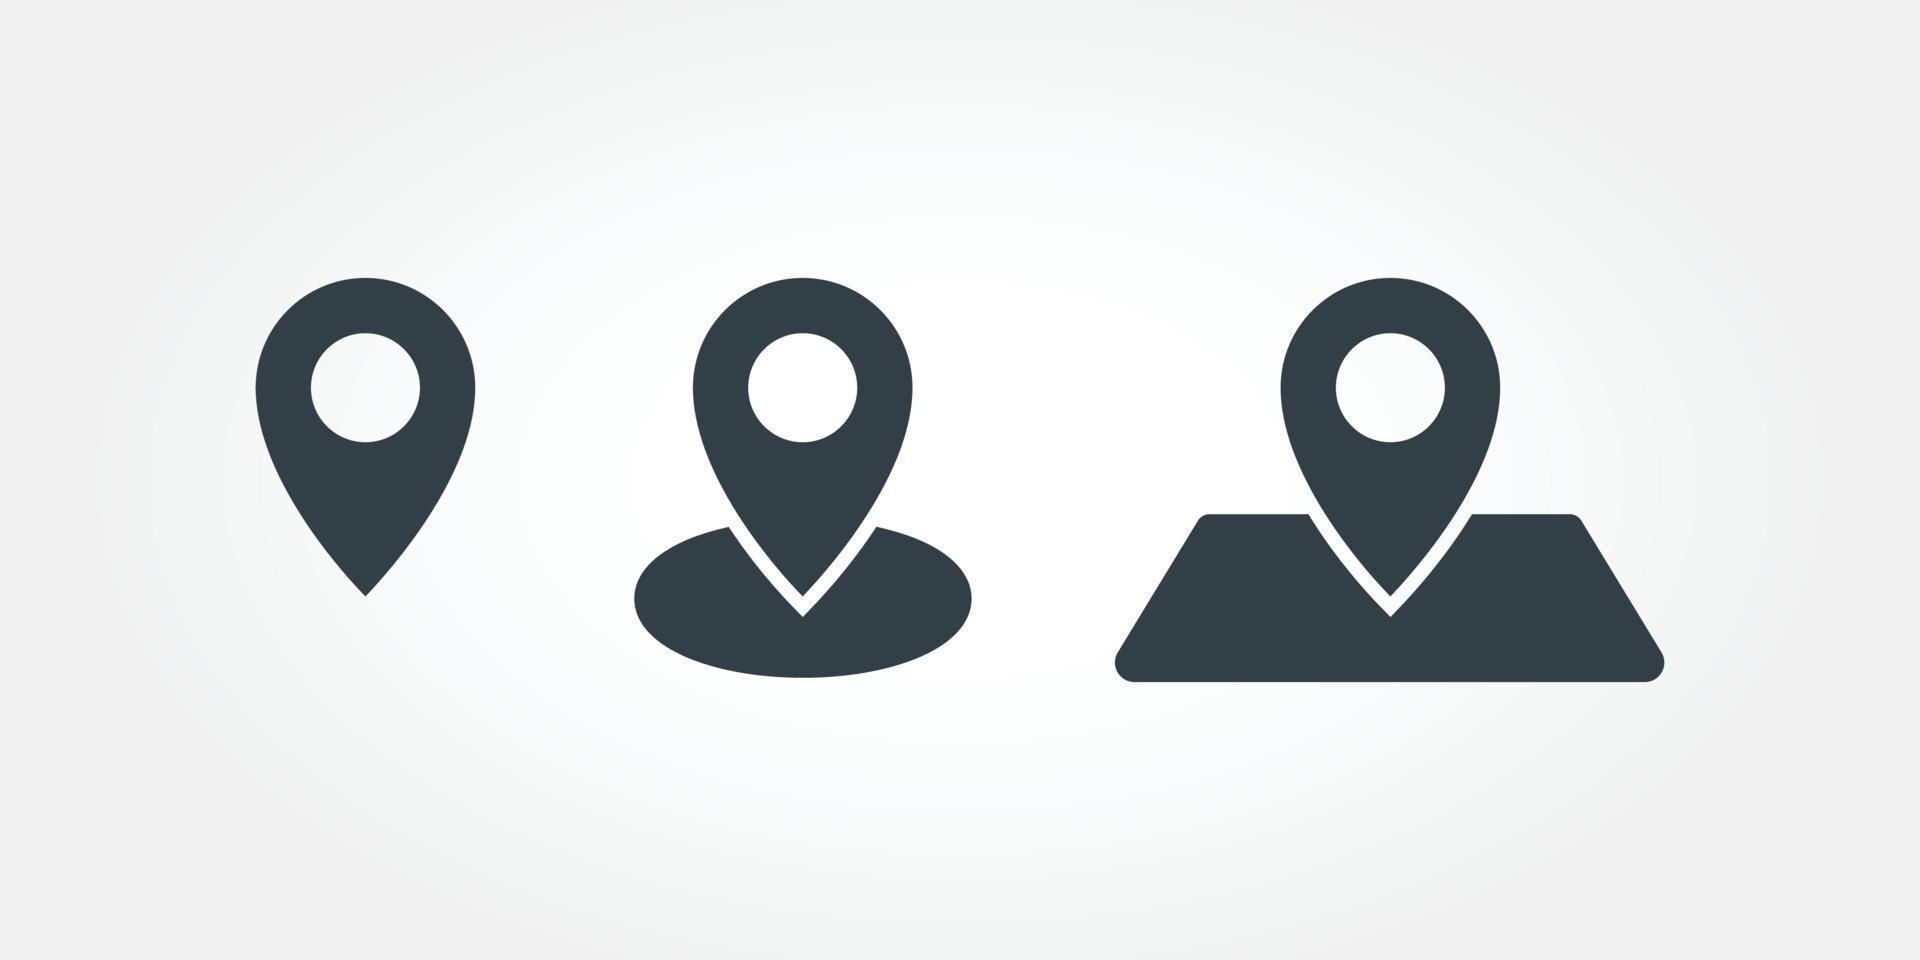 Pins location icons set simple design vector